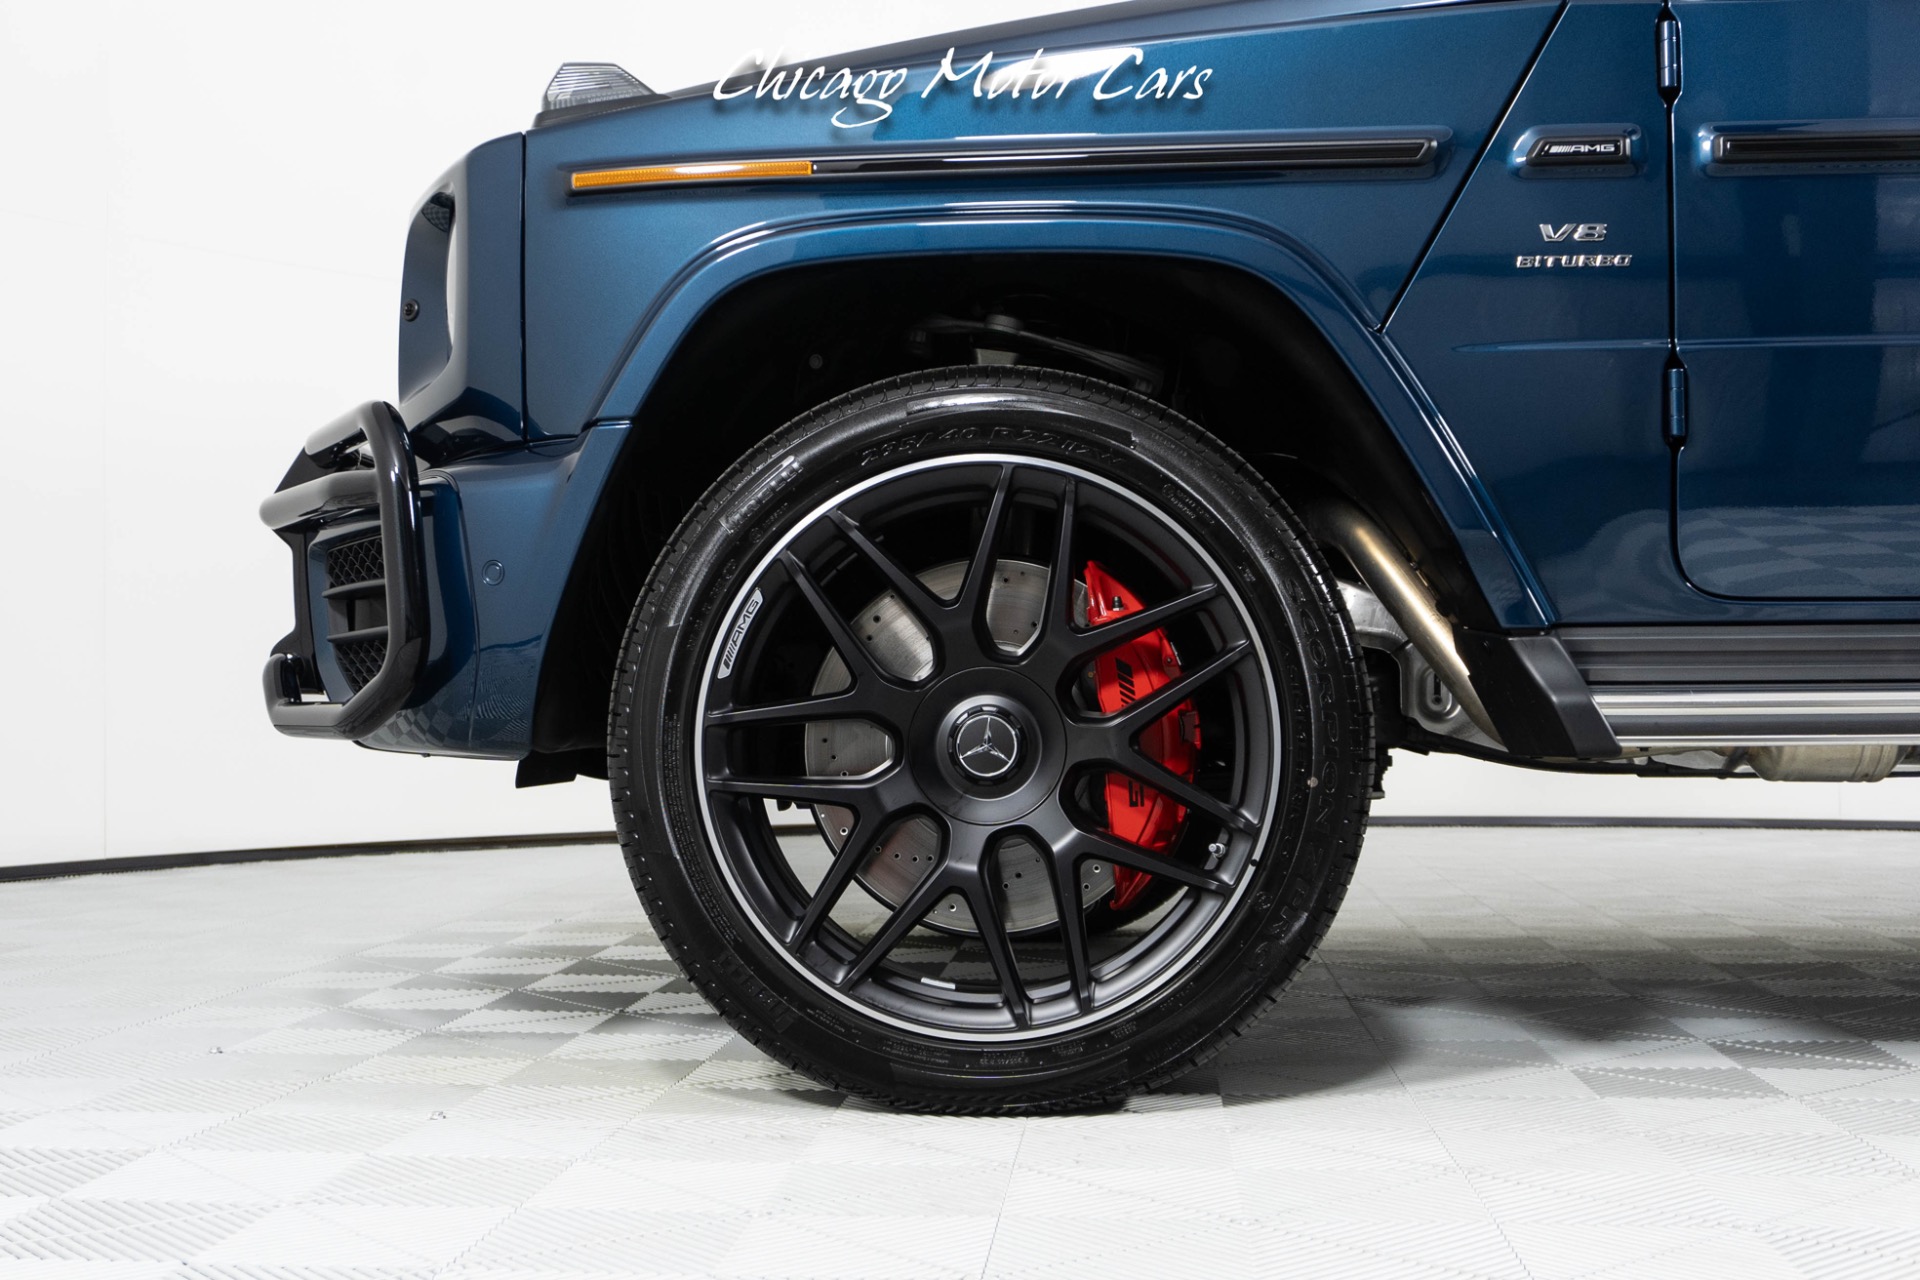 Used-2024-Mercedes-Benz-G-Class-G63-AMG-Only-54-Miles-Rare-Sea-Blue-Metallic-AMG-Night-Package-Carbon-Fiber-Trim